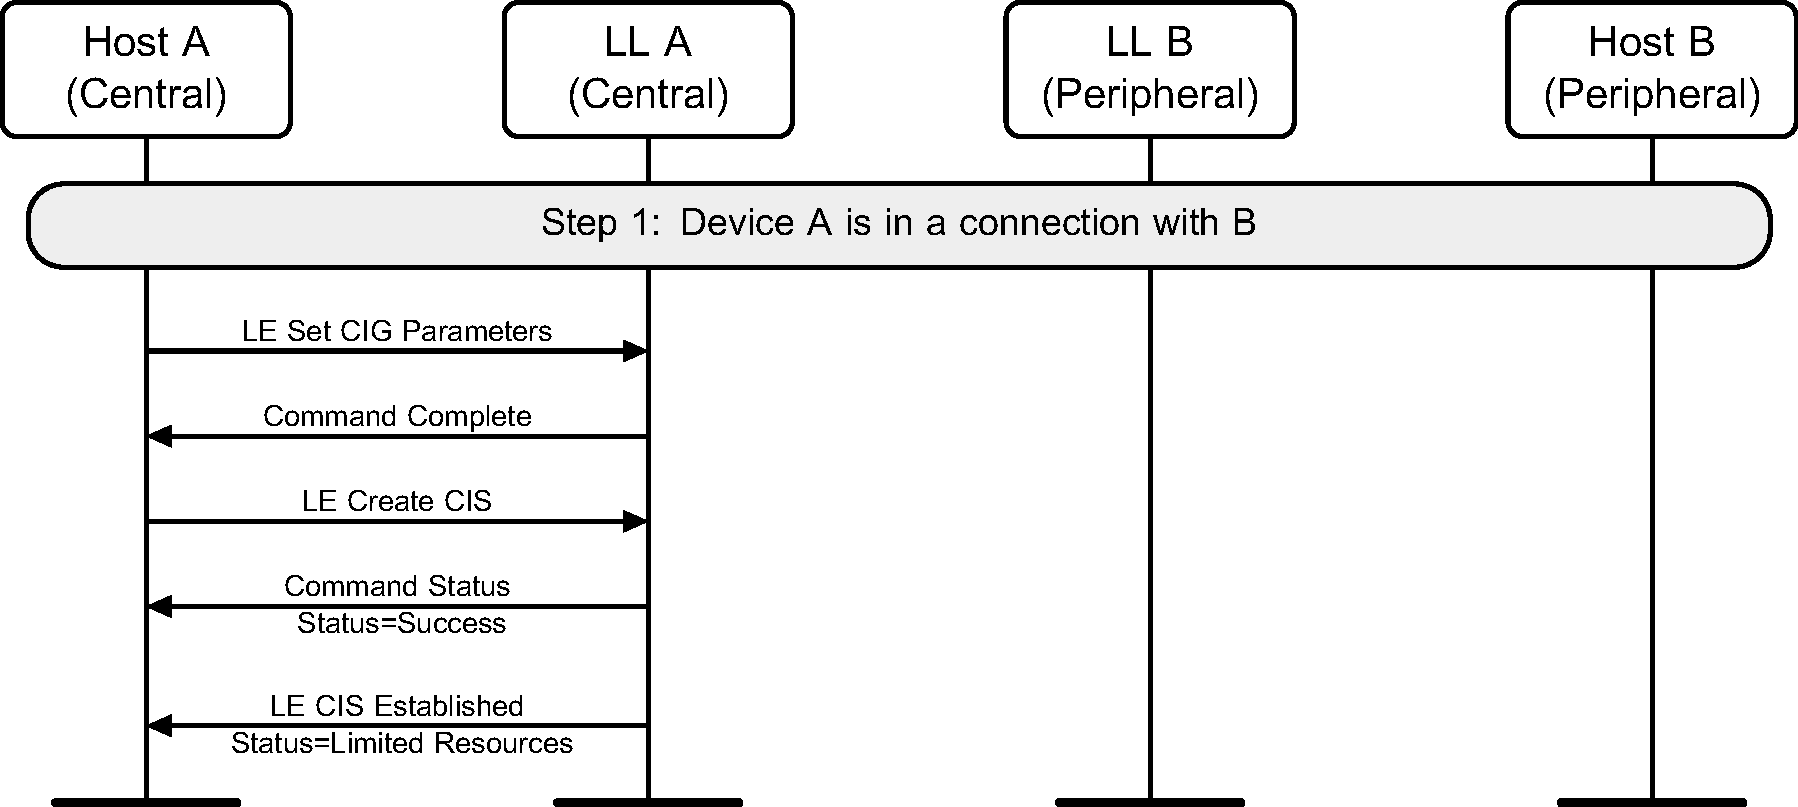 Link Layer in Device A rejects a request to create a CIS